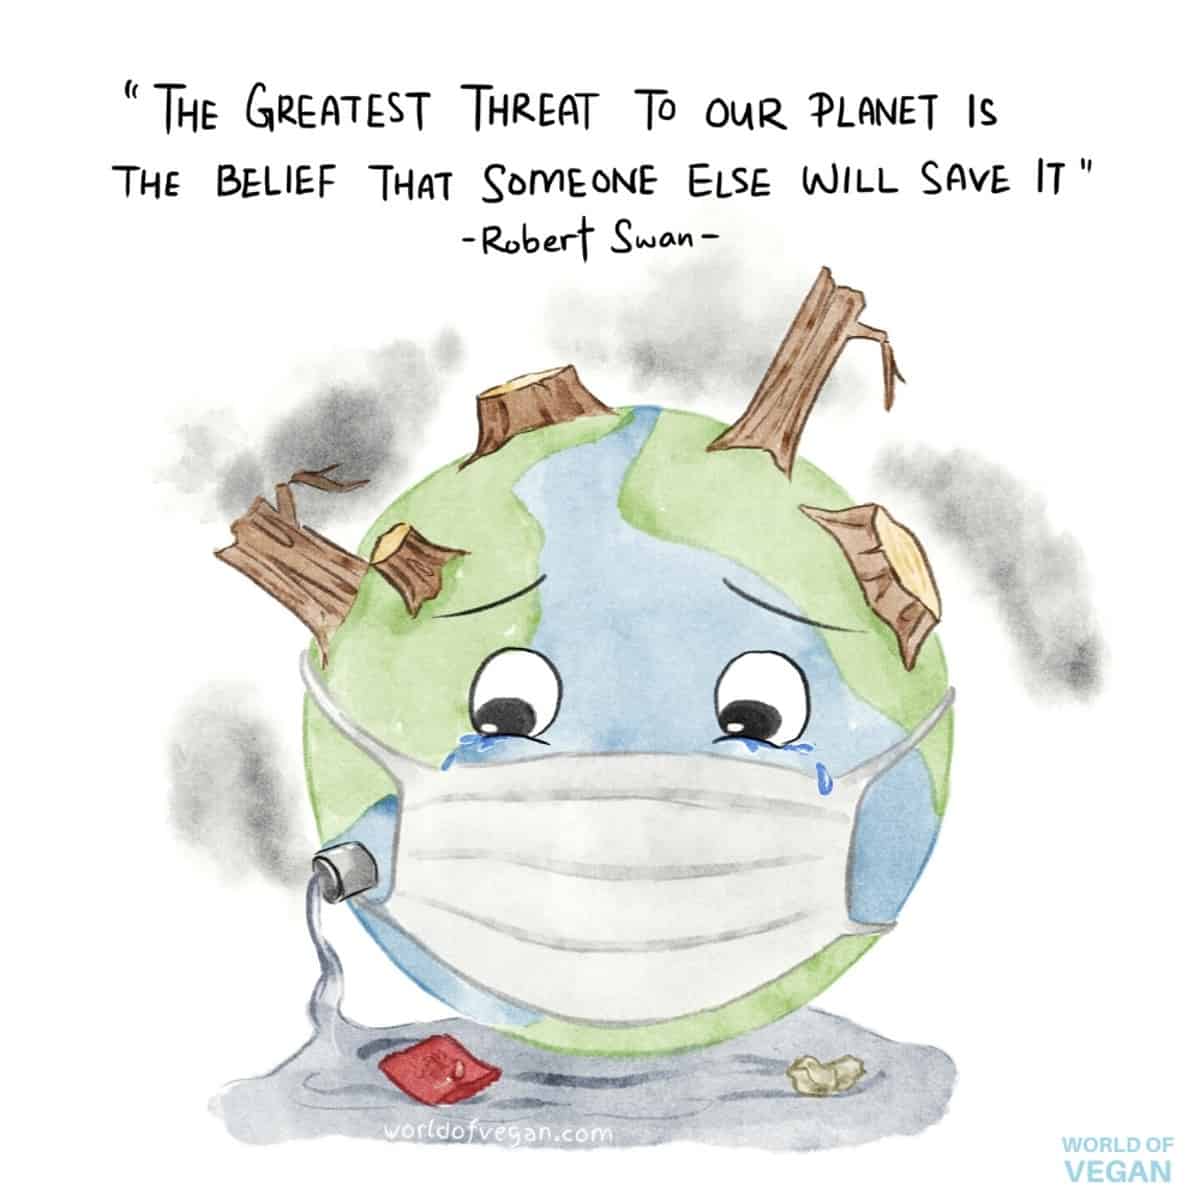 Illustration of a polluted planet earth wearing a mask with chemicals and smog reminding people to go vegan.